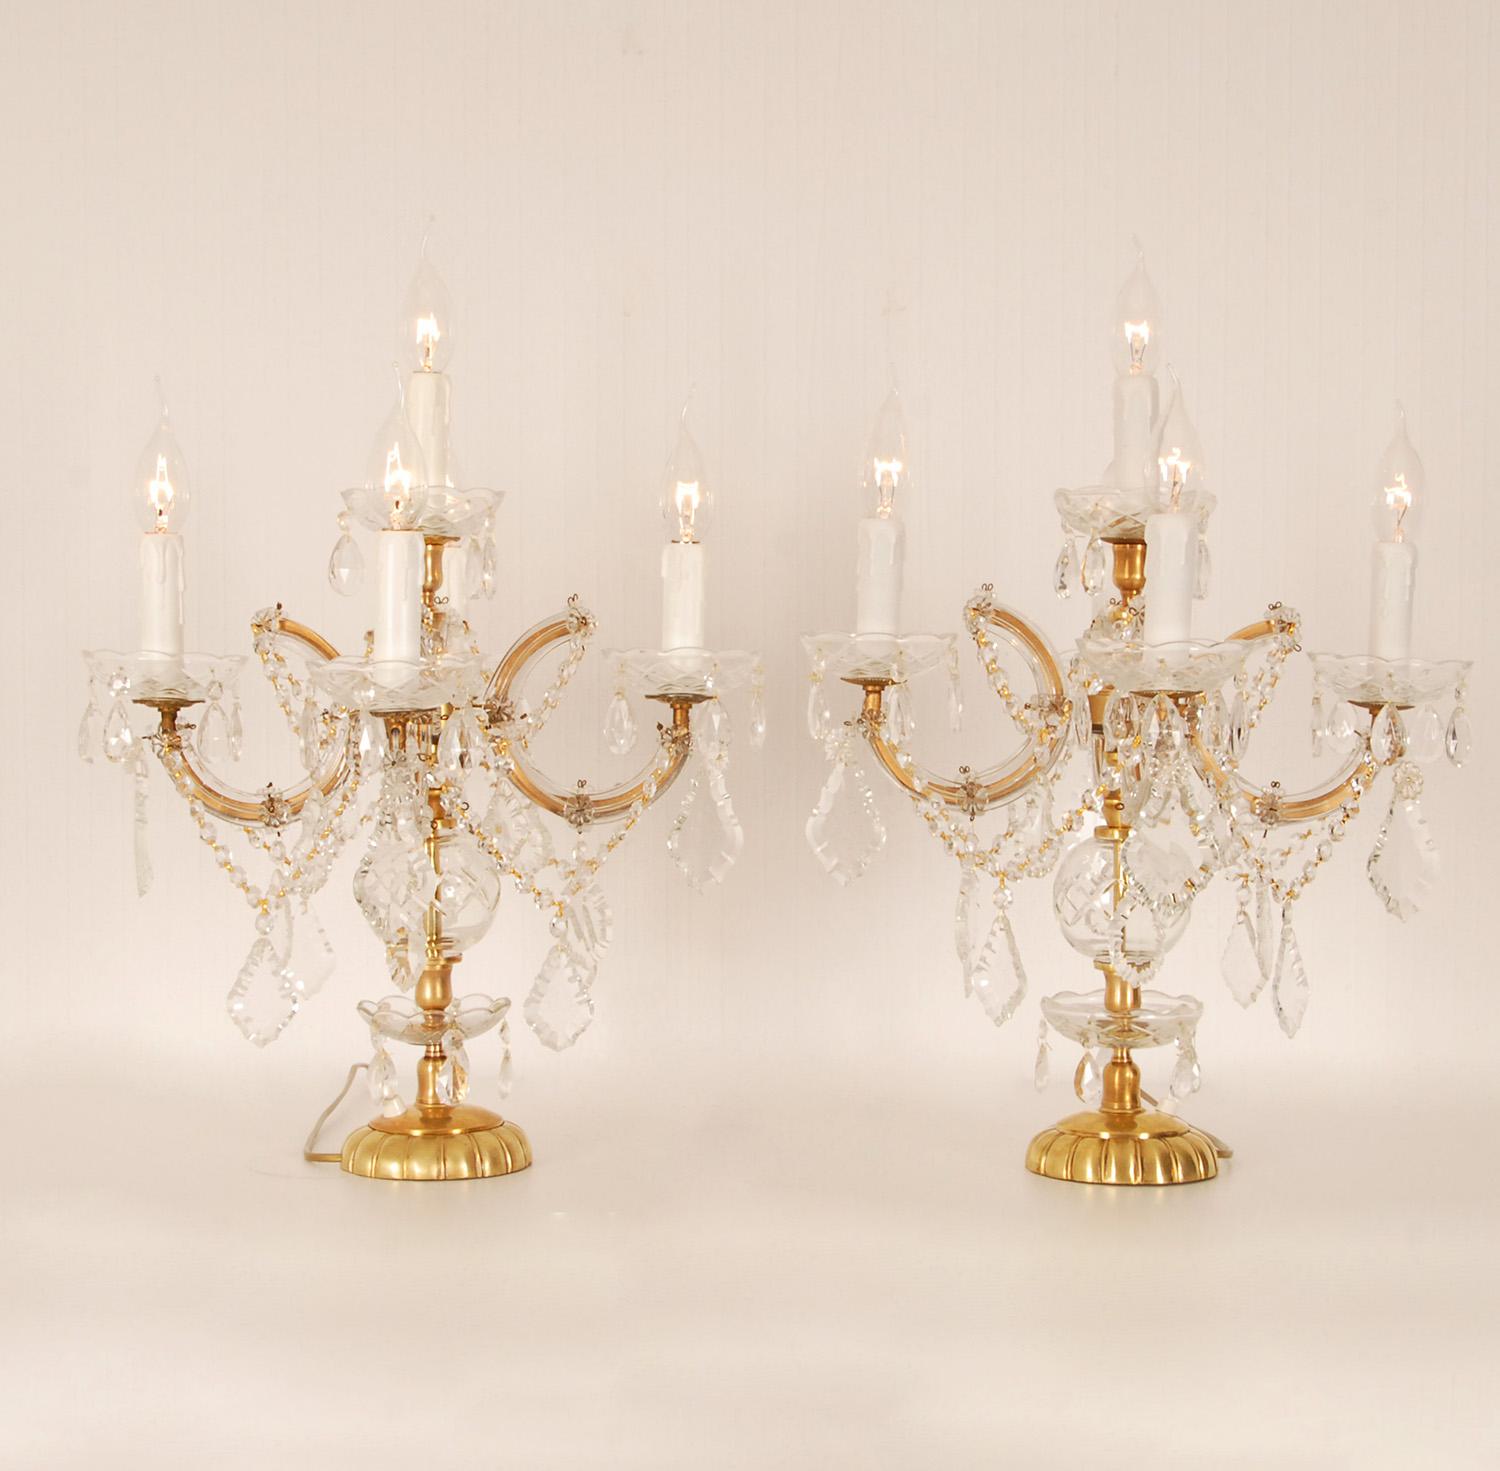 Hand-Crafted Vintage Crystal Lamps Marie Therese Gold Gilded Brass Crystal Table Lamps a Pair For Sale